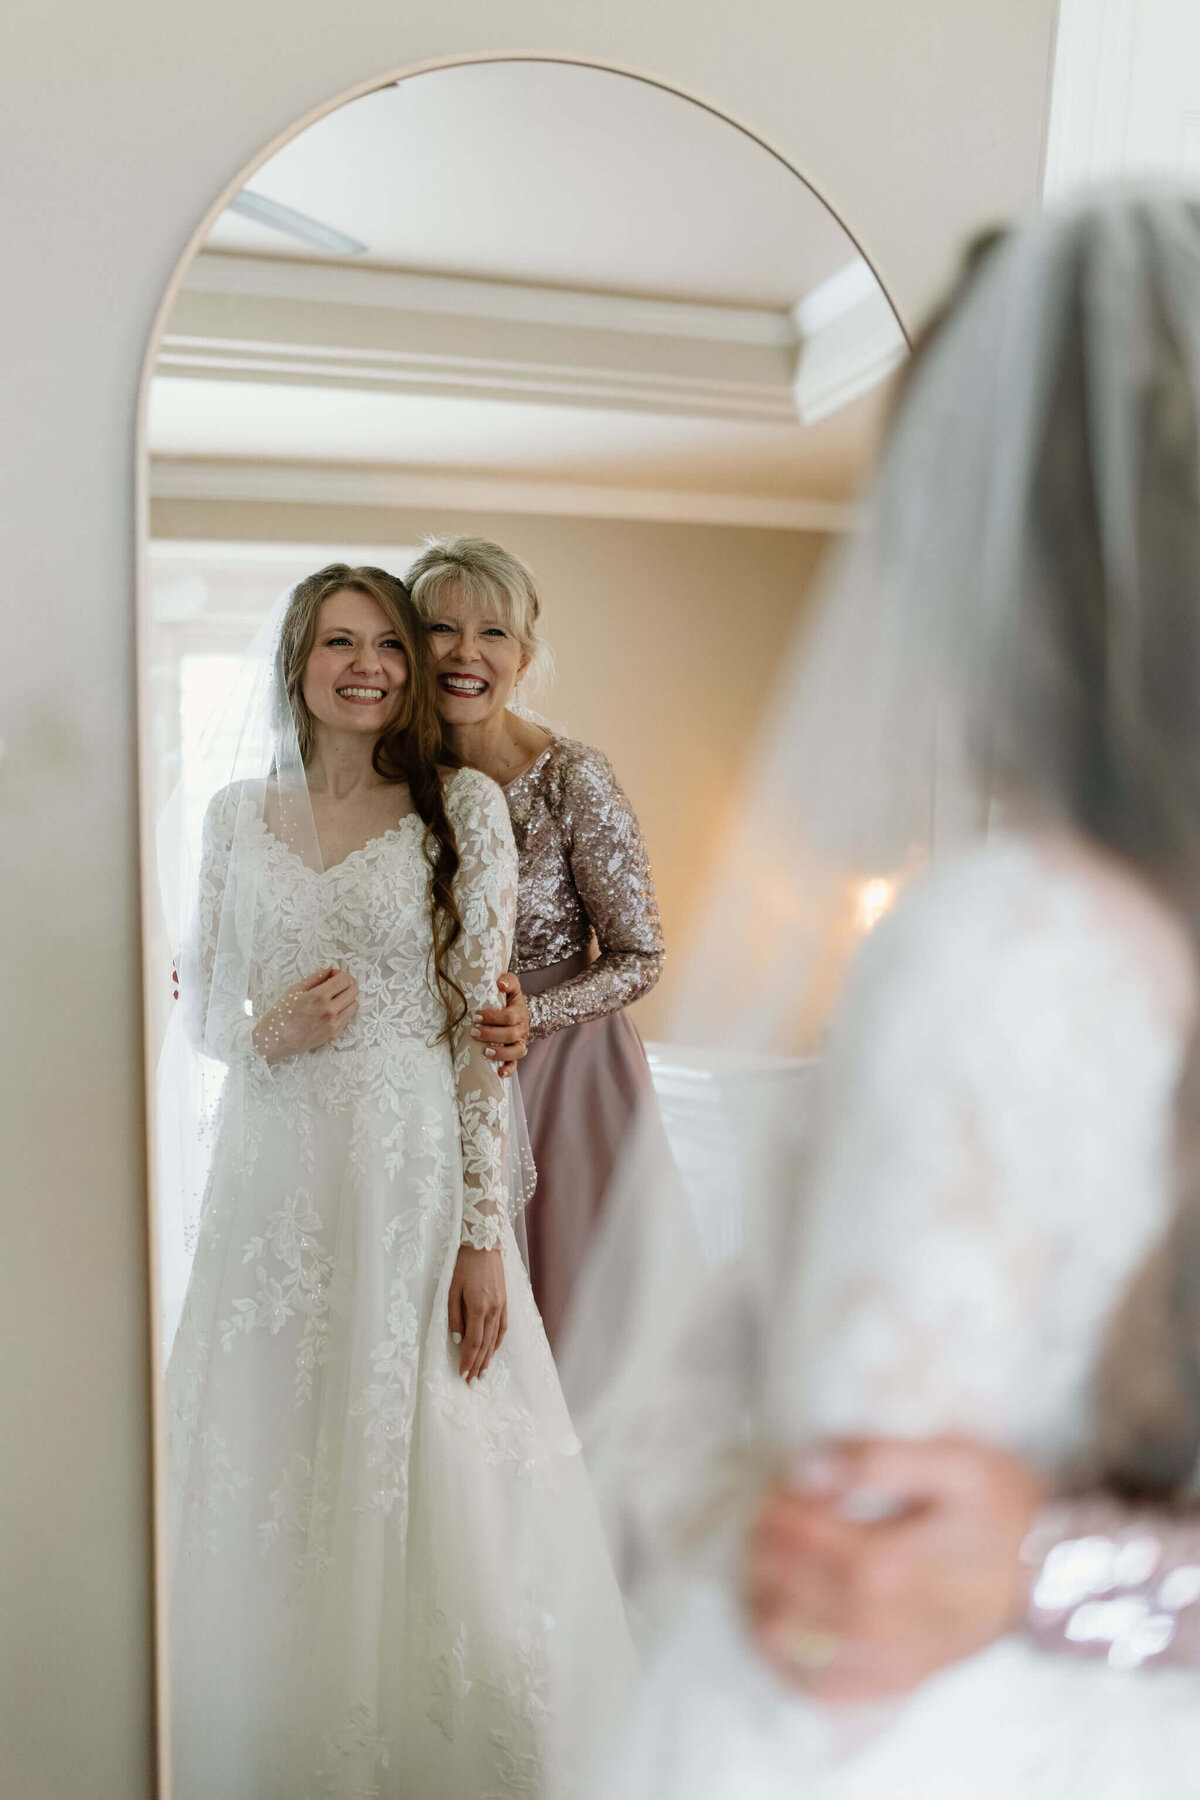 Mother of bride and bride lookin at bride in mirror after putting on wedding dress and veil before East TX wedding ceremony